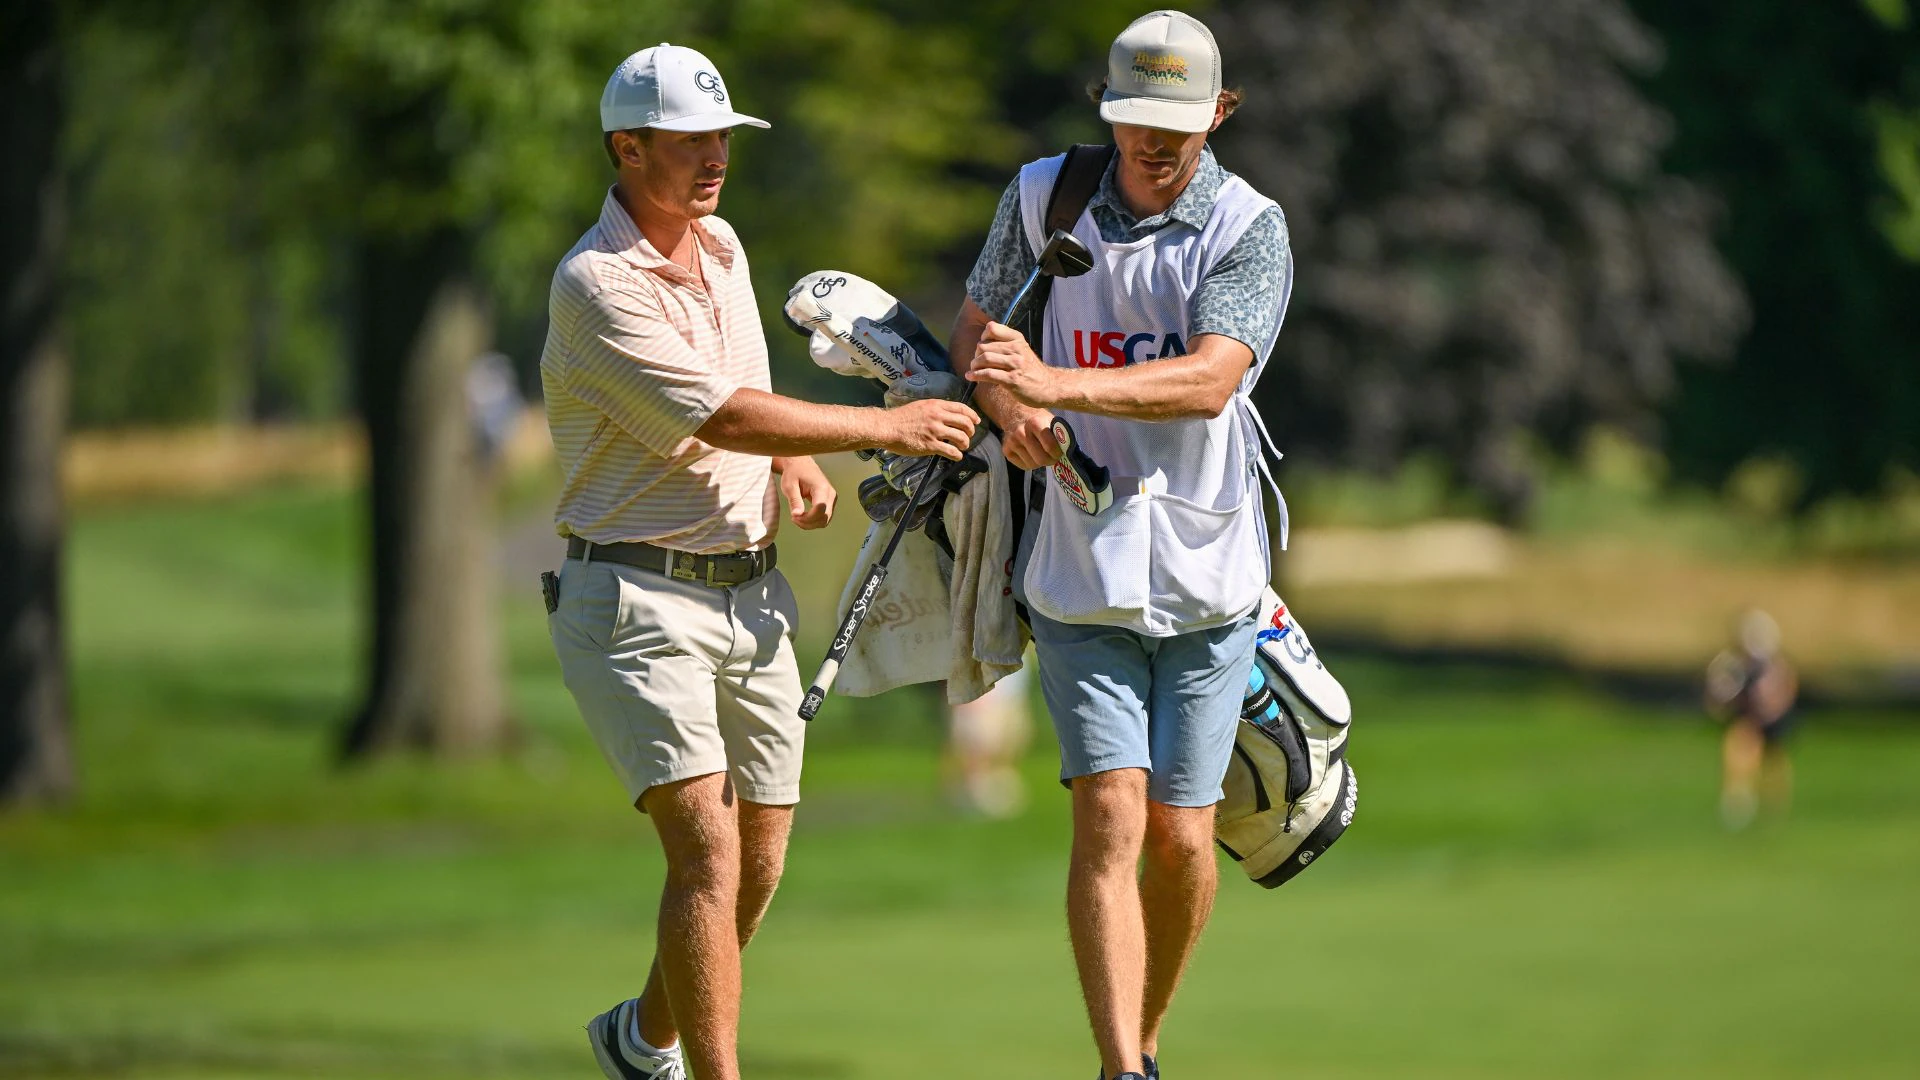 With Will Wilcox on his bag, Ben Carr reaches U.S. Amateur Championship semifinals